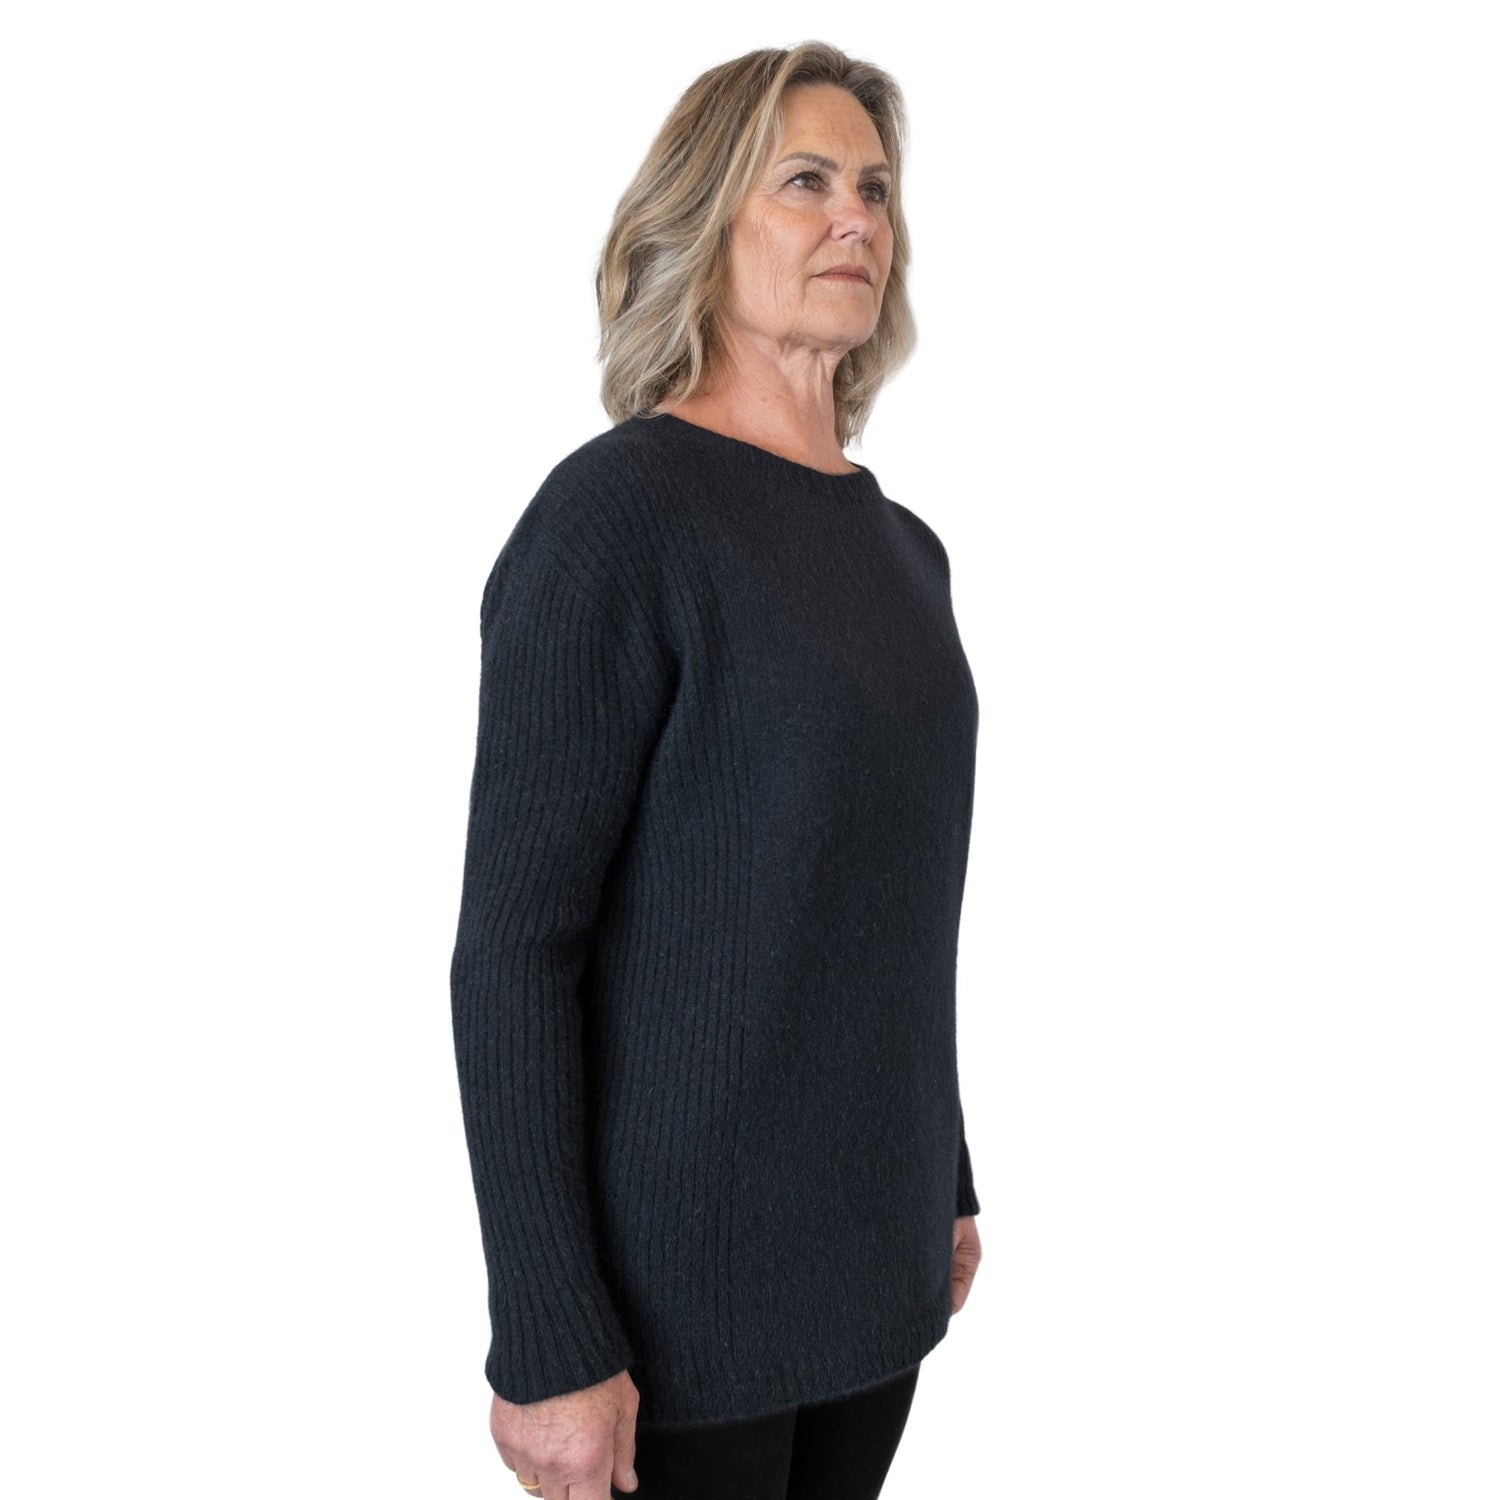 Side Rib sweater in colour Onyx. Side